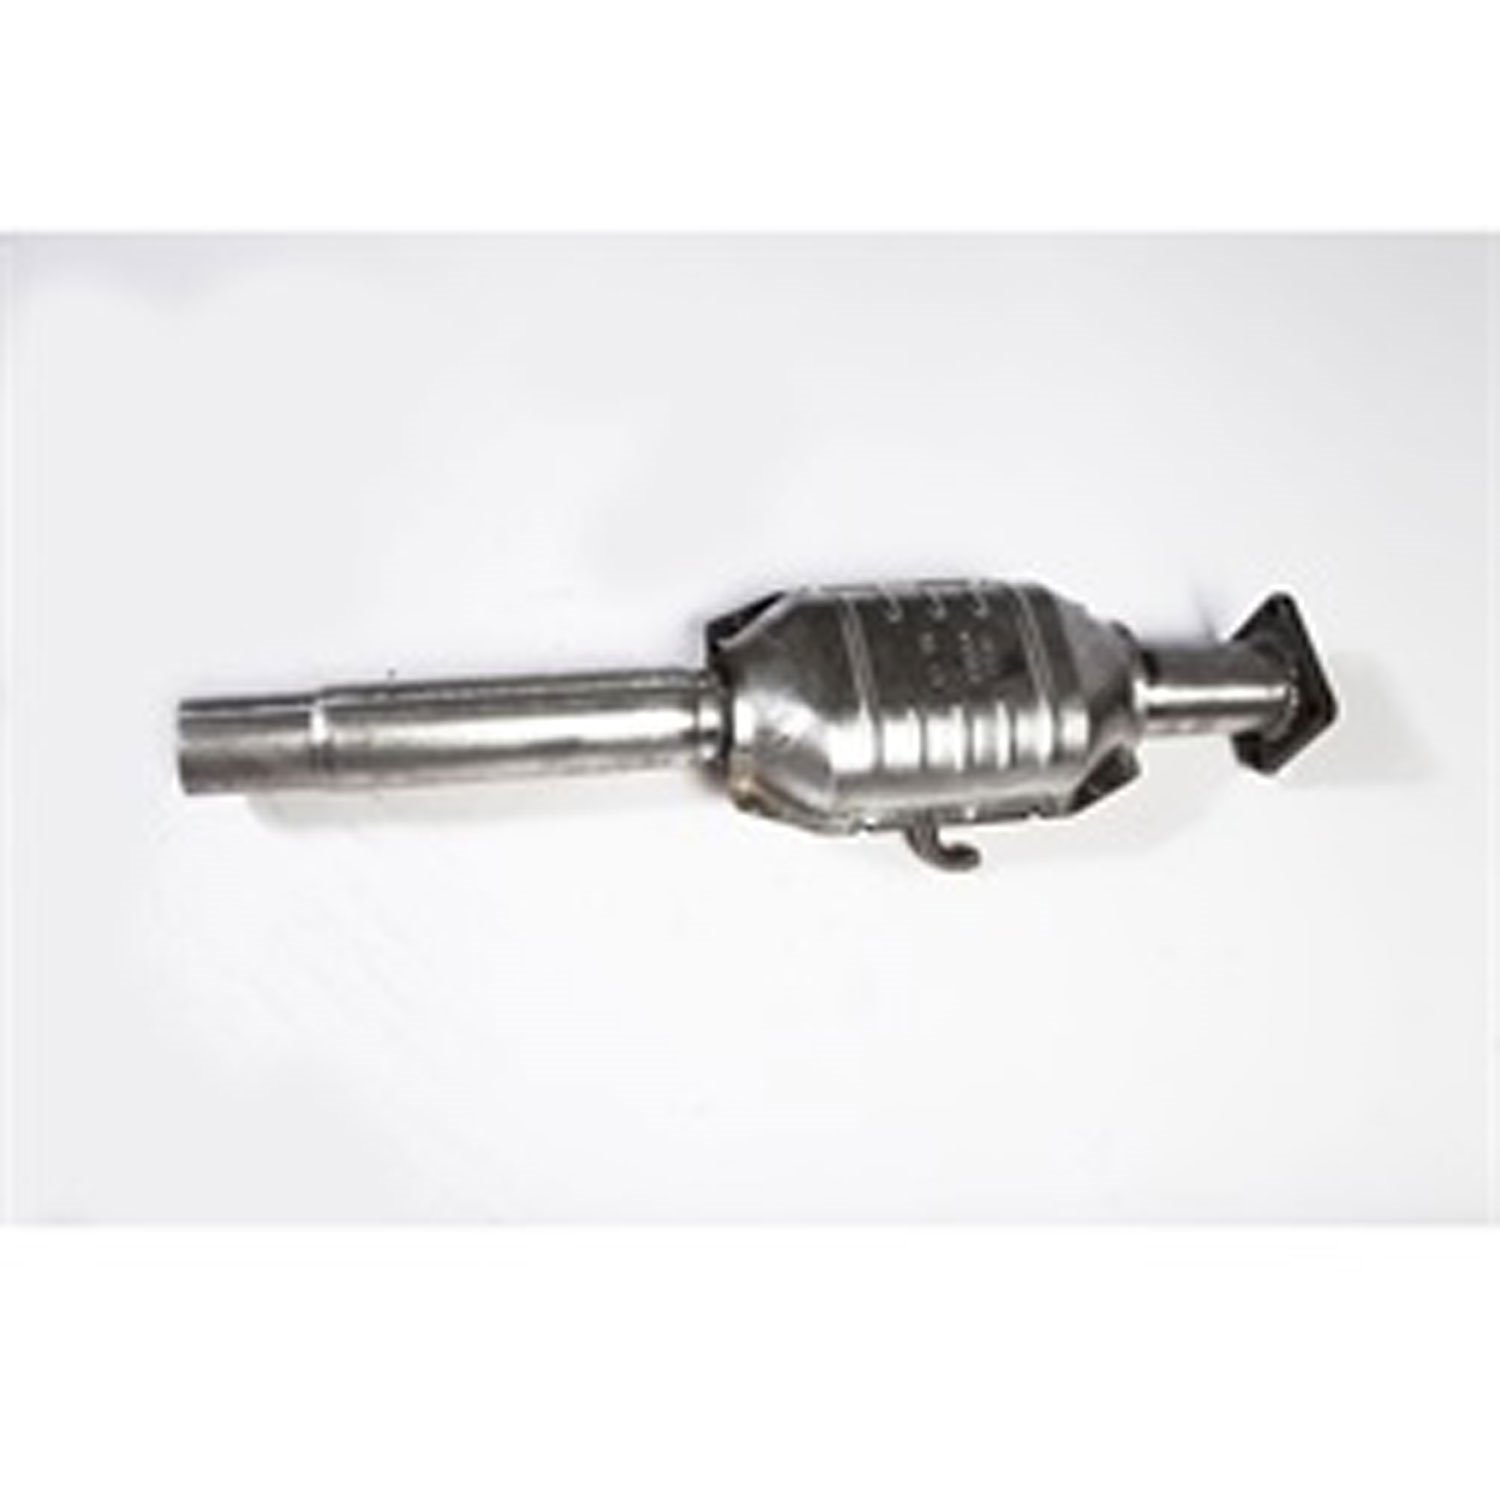 Replacement catalytic converter, Fits 84-85 Jeep Cherokee XJ with a 2.5 liter engine and 87-90 W